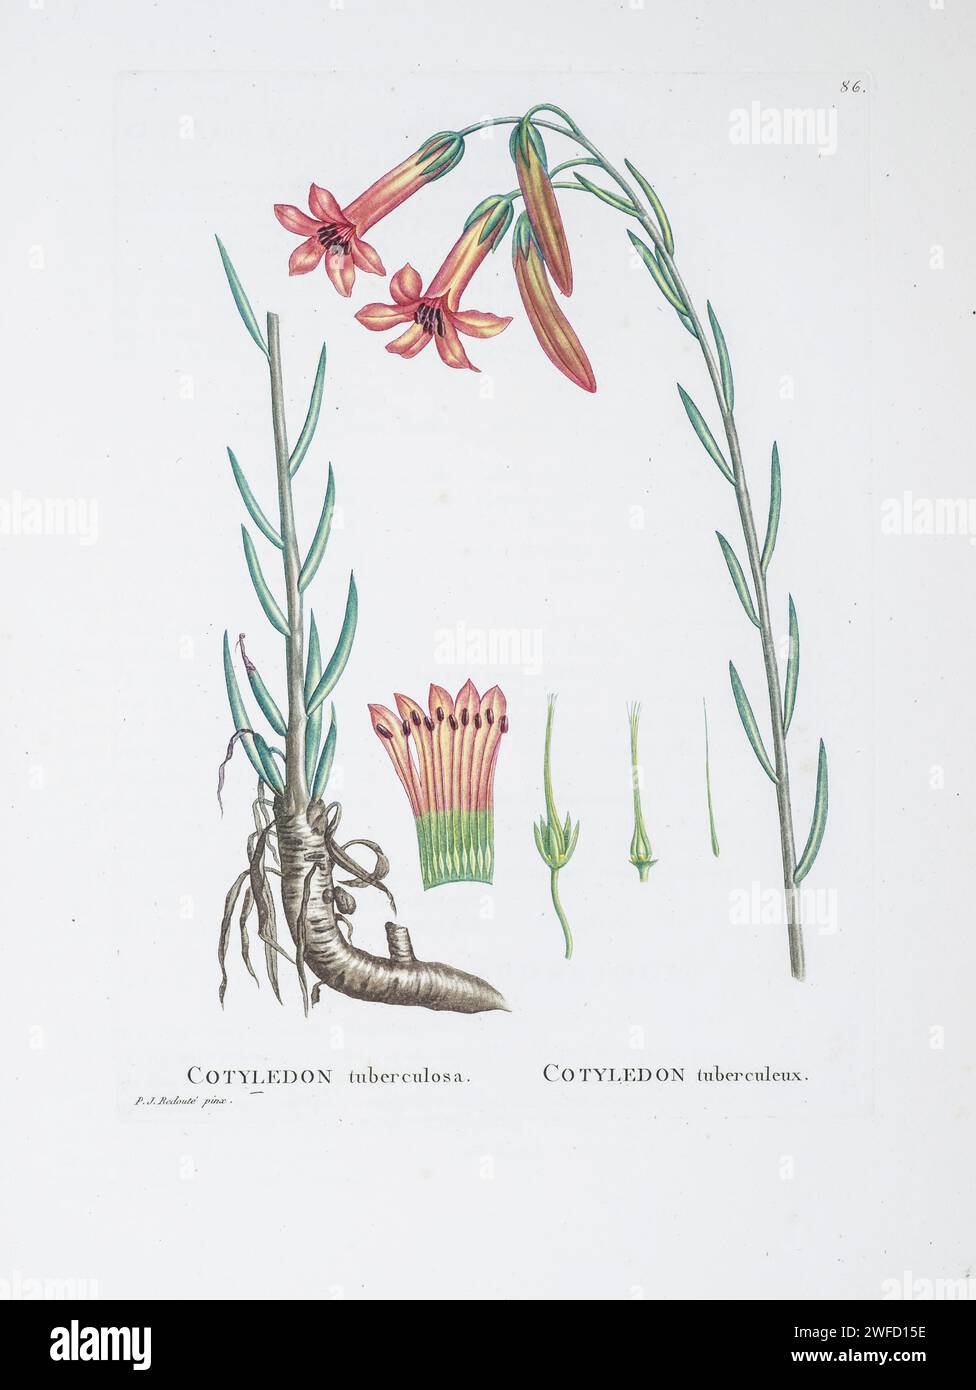 Cotyledon grandiflora Burm. f. Here As Cotyledon tuberculosa from History of Succulent Plants [Plantarum historia succulentarum / Histoire des plantes grasses] painted by Pierre-Joseph Redouté and described by Augustin Pyramus de Candolle 1799 Stock Photo